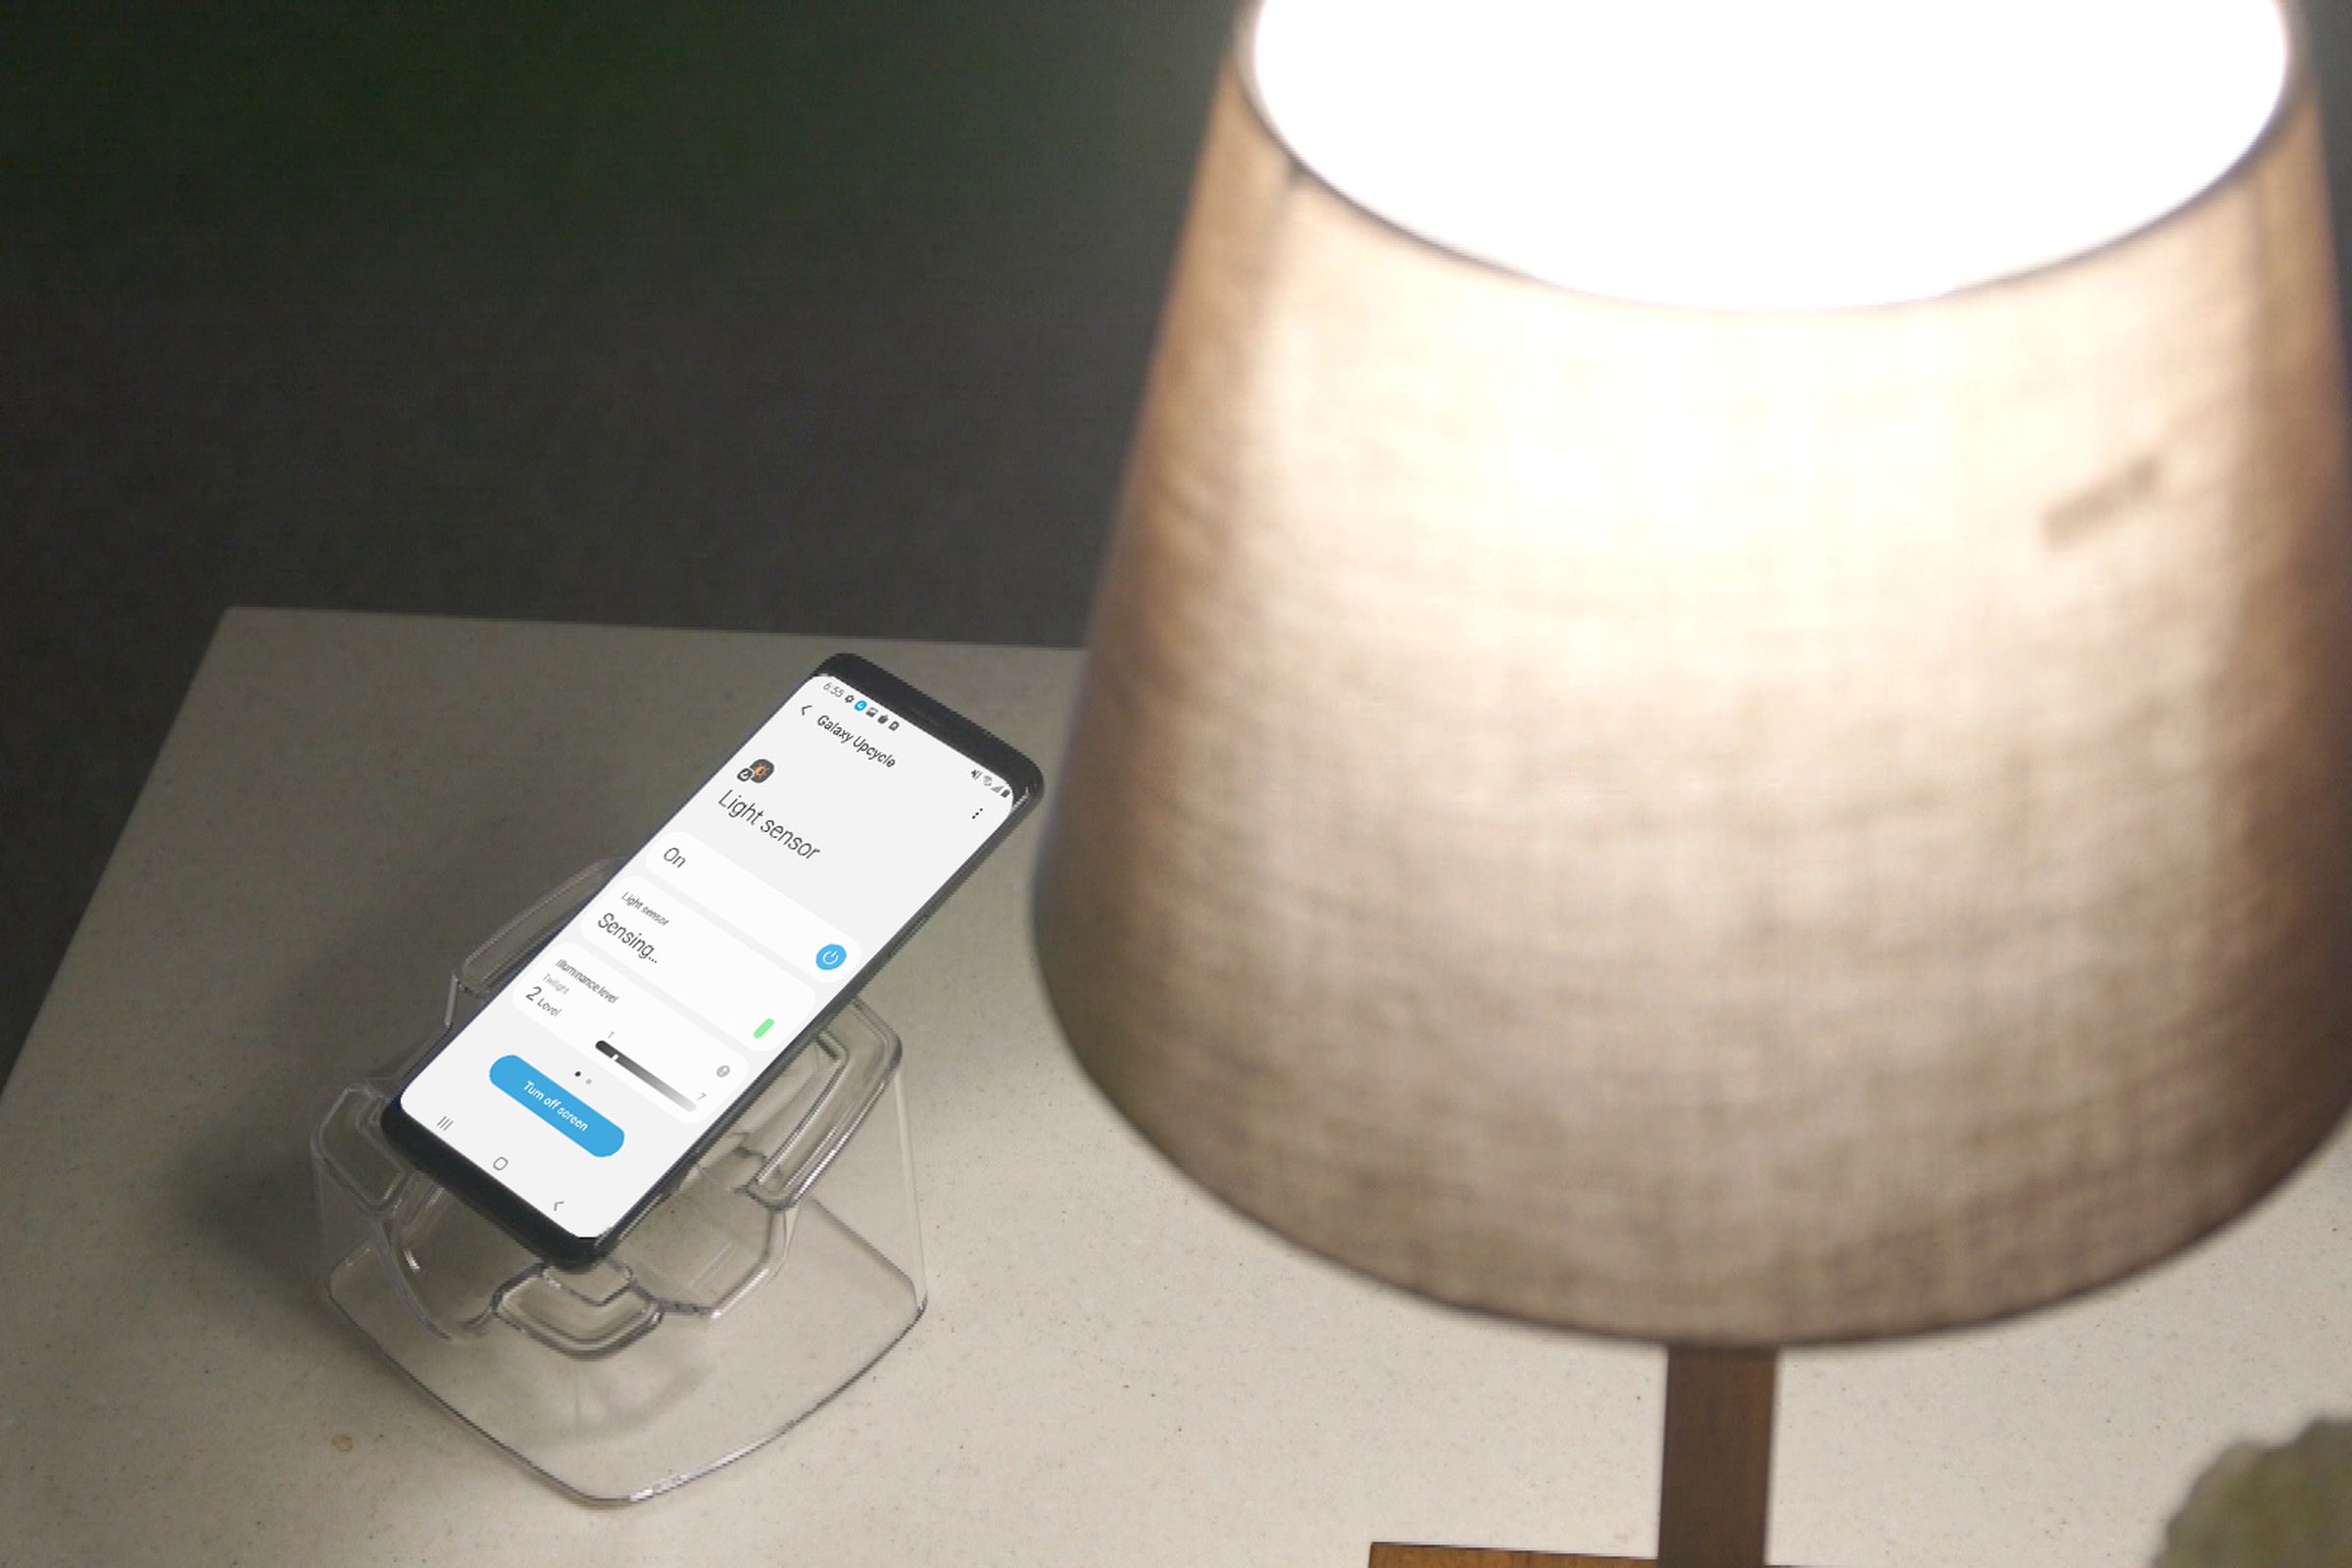 The feature can alert you to the sound of a crying baby or turn on a lamp when light levels dip.